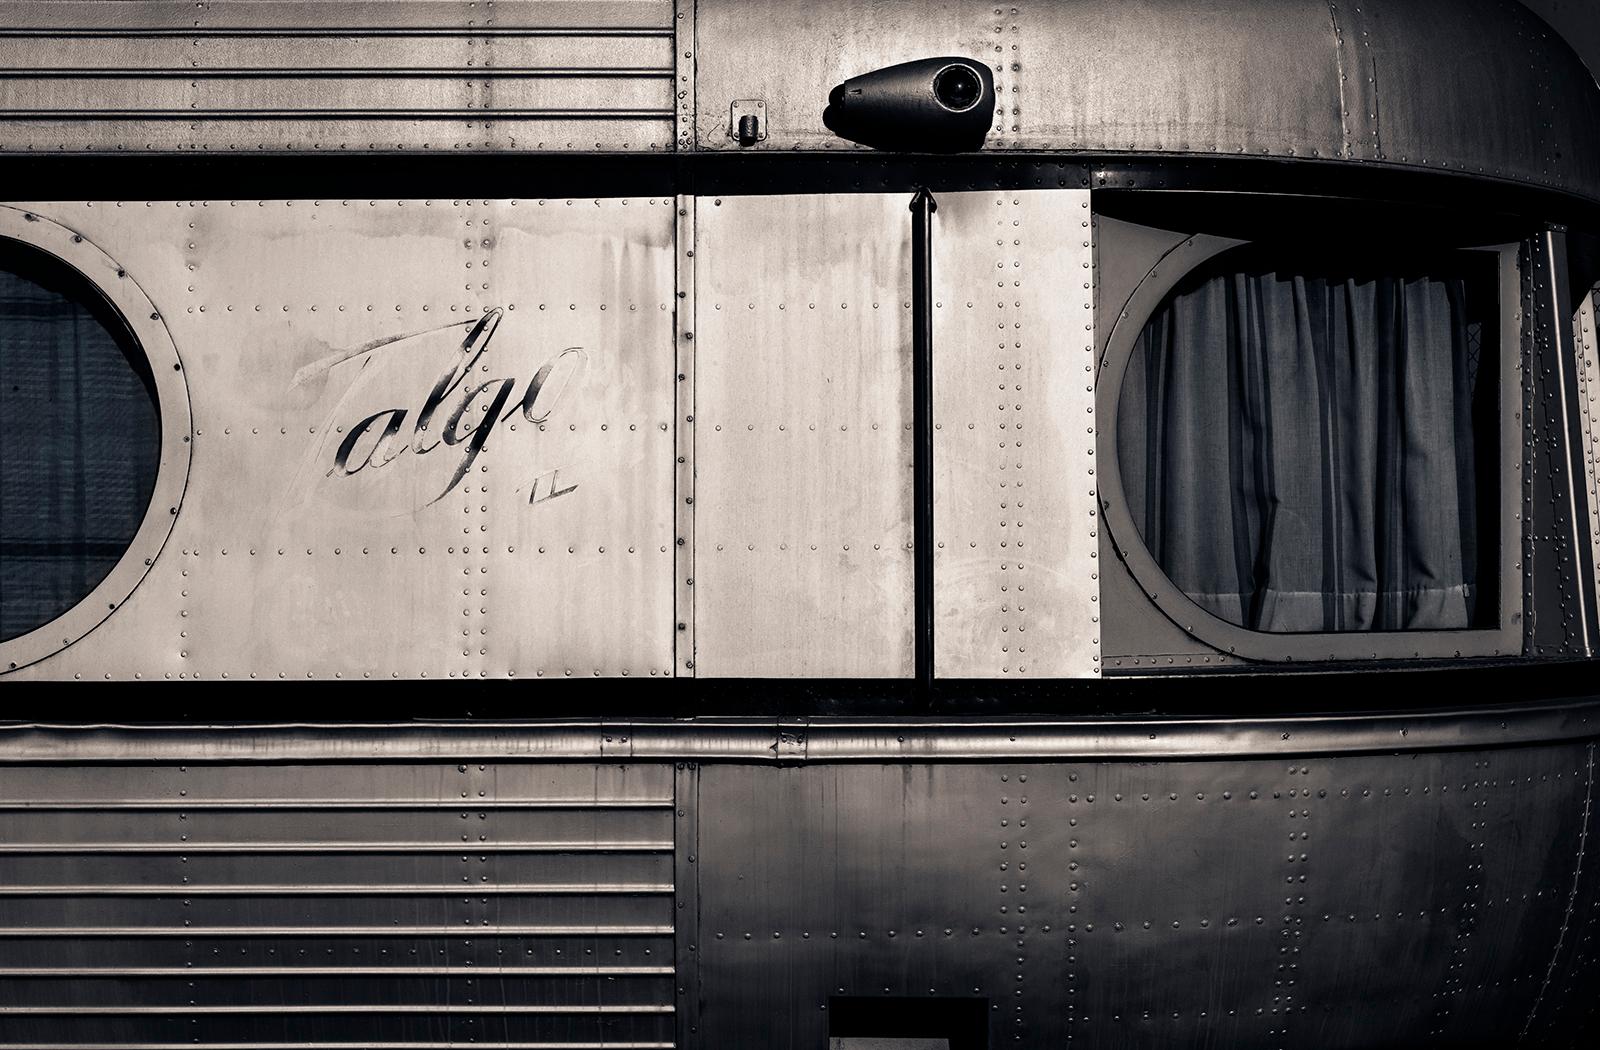 ' Train ' by Ian Sanderson - Talgo, Spain
Signed limited edition archival pigment print, 2013   -  Edition 1/5

This is an Archival Pigment print on fiber based paper ( Hahnemühle Photo Rag® Baryta 315 gsm , Acid- and lignin-free paper, Museum